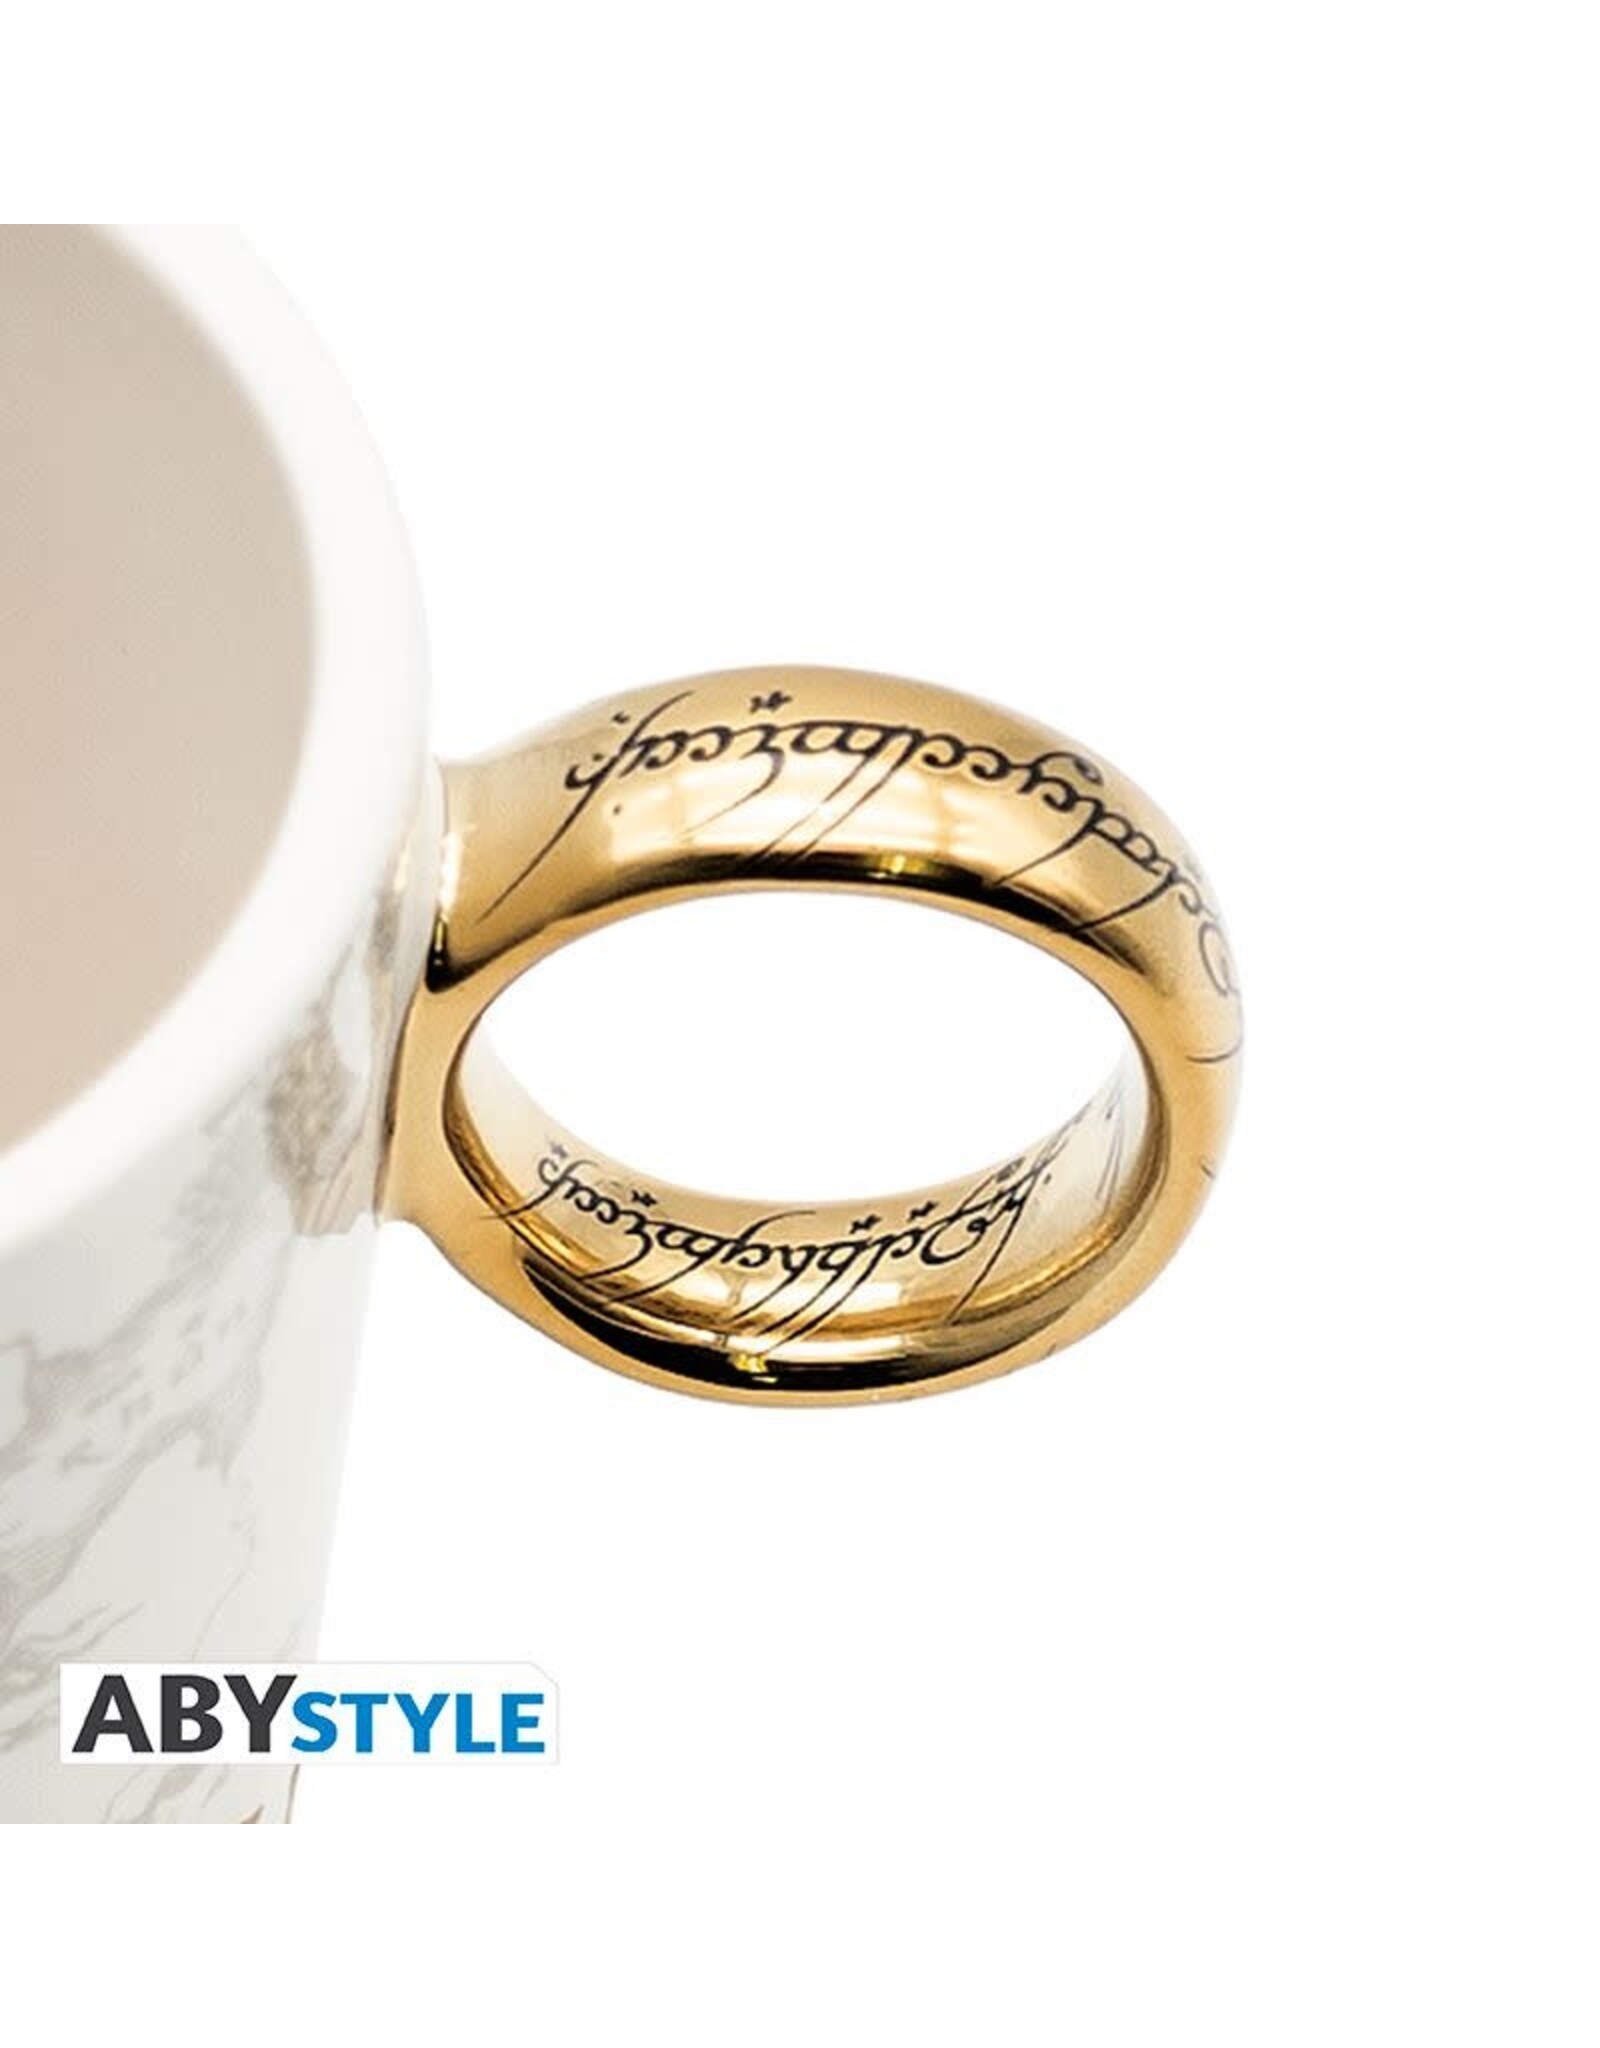 Abysse America Lord of the Rings - One Ring Handle 3D Mug